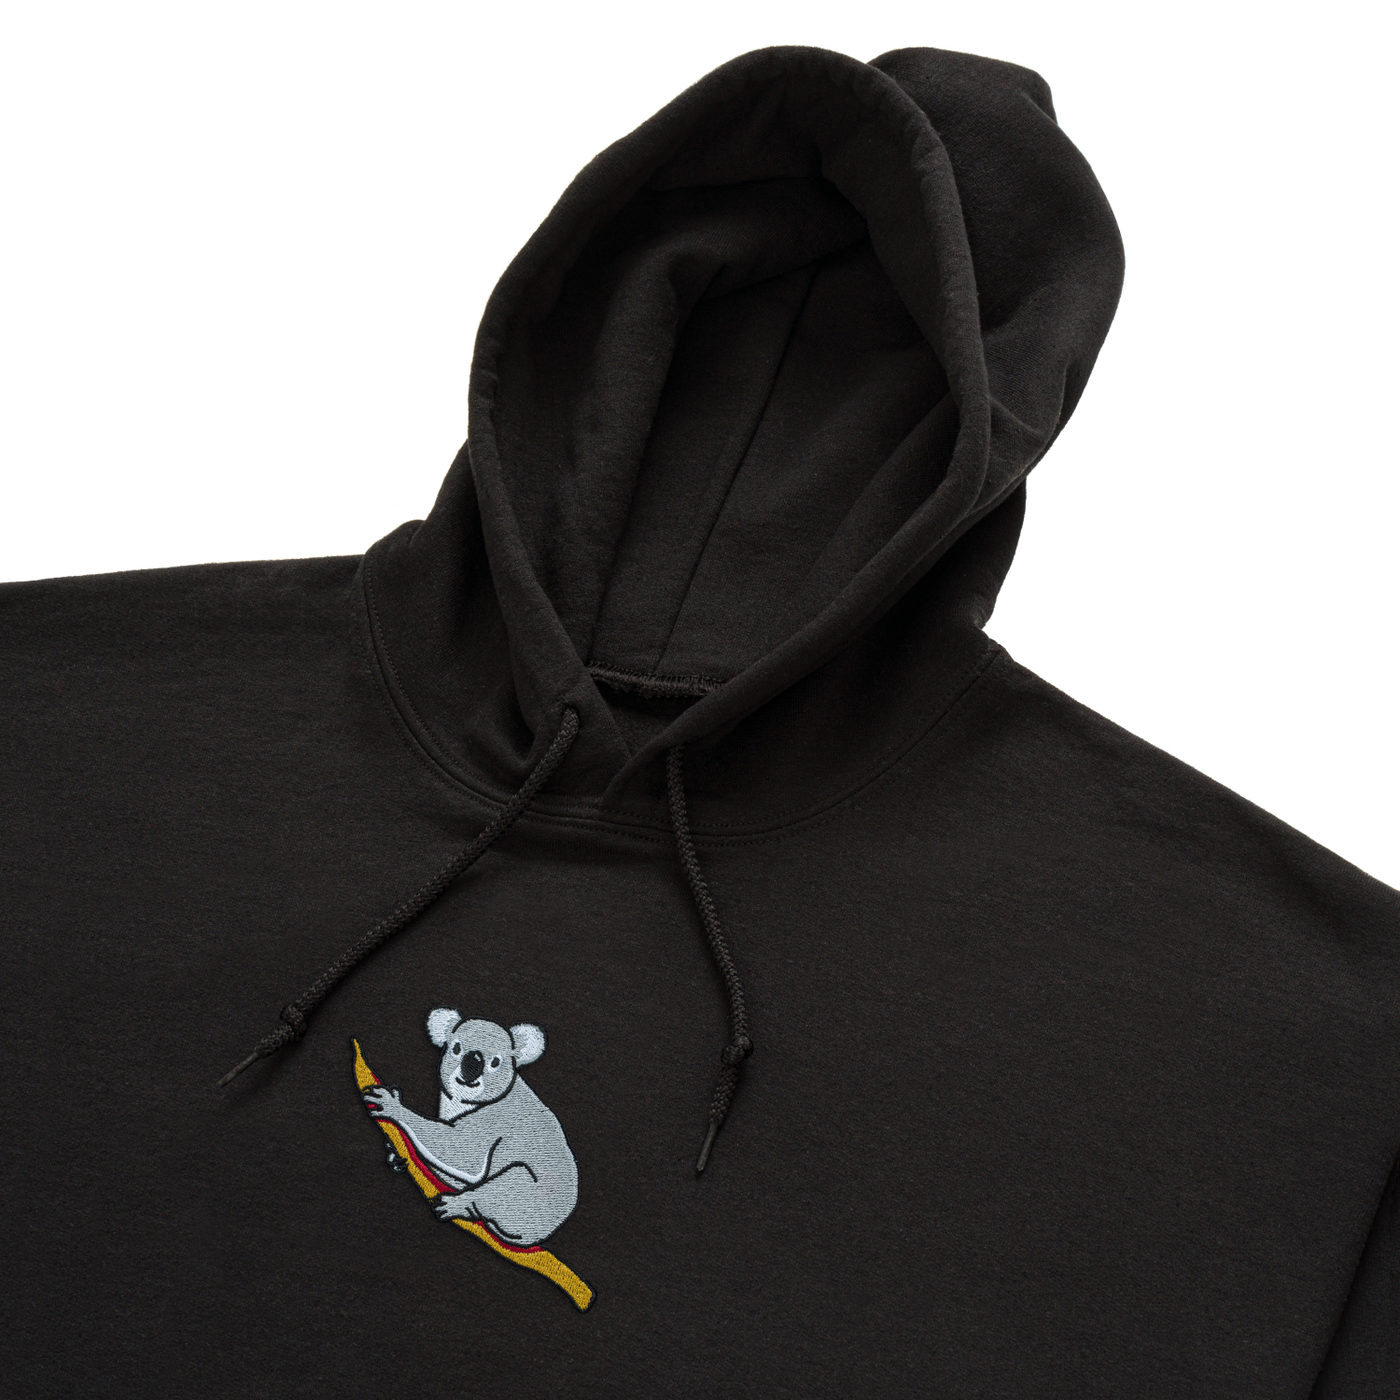 Bobby's Planet Men's Embroidered Koala Hoodie from Australia Down Under Animals Collection in Black Color#color_black